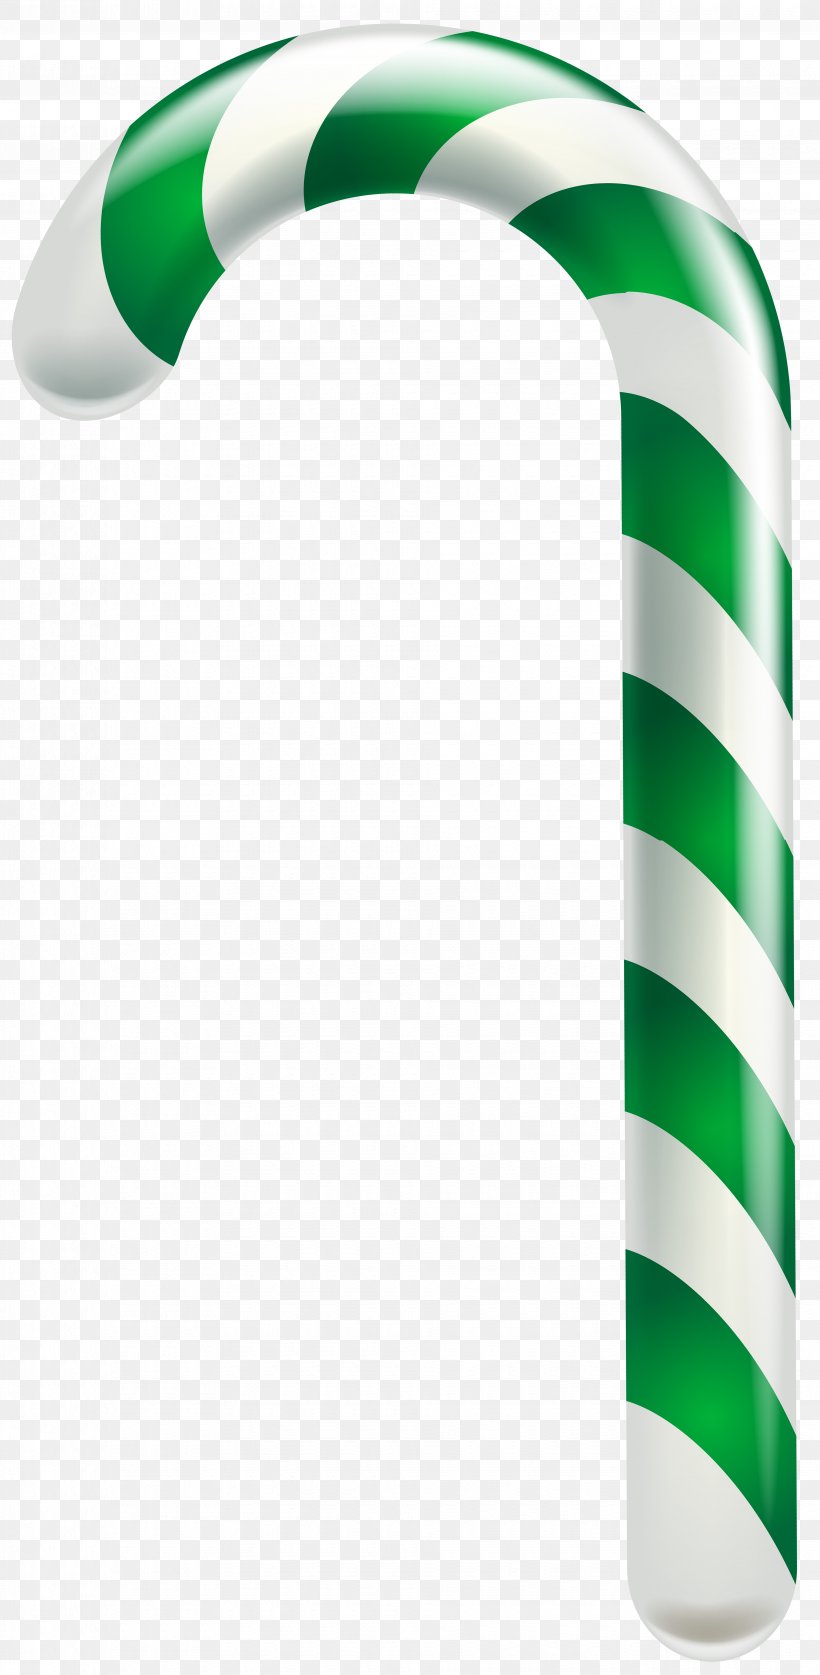 Candy Cane Ribbon Candy Christmas Candy, PNG, 3915x8000px, Candy Cane, Blog, Candy, Christmas, Green Download Free